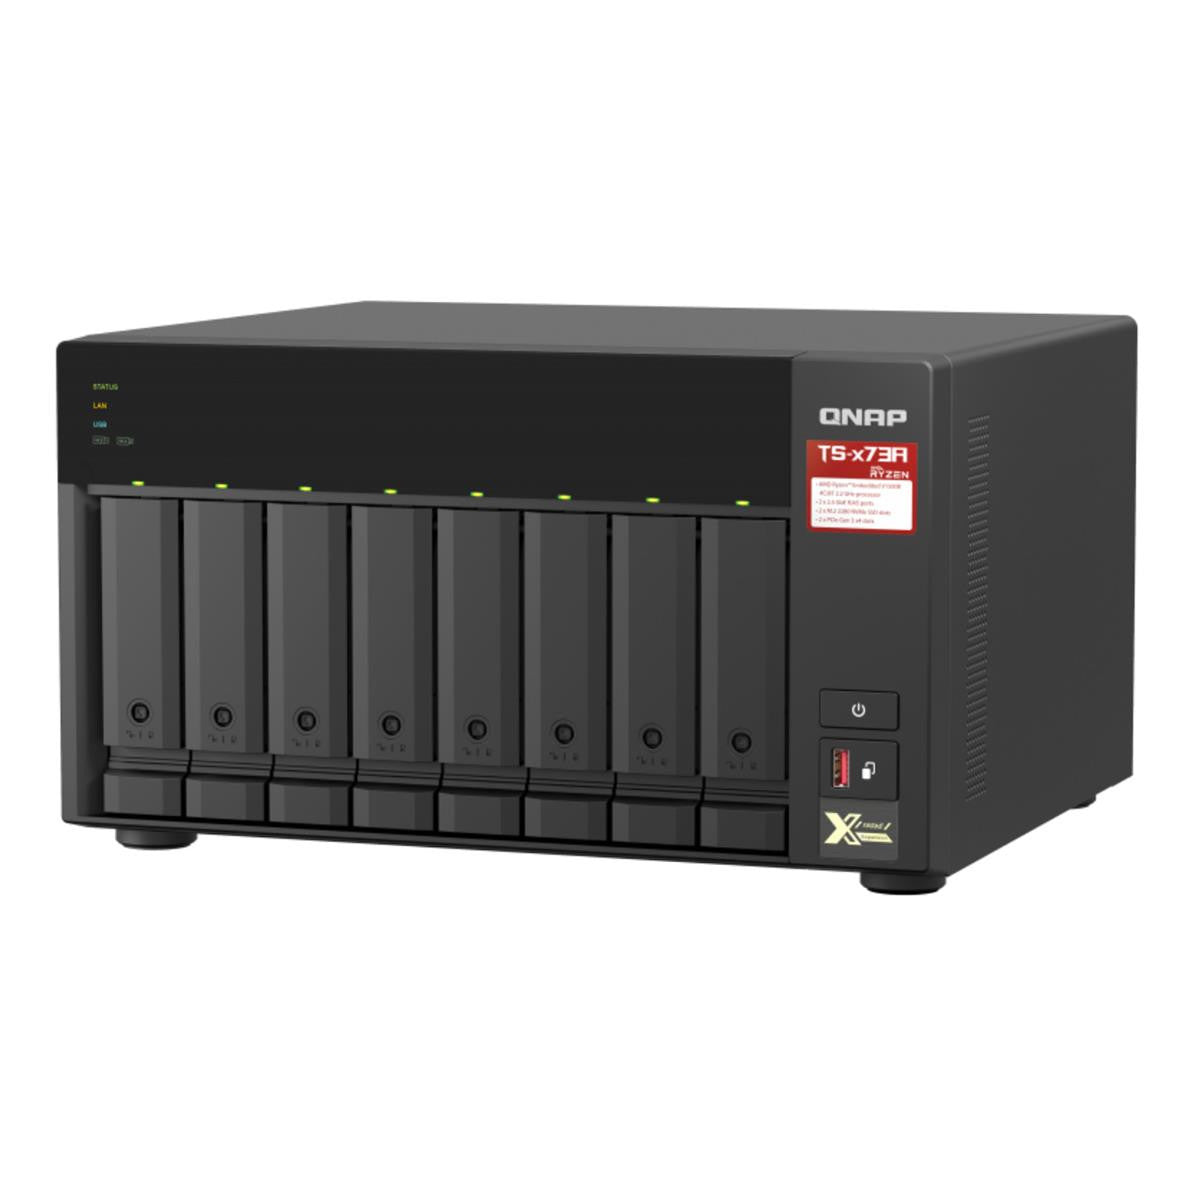 QNAP TS-873A 8-BAY NAS with 64GB DDR4 RAM and 24TB (8x3TB) Seagate Ironwolf NAS Drives Fully Assembled and Tested